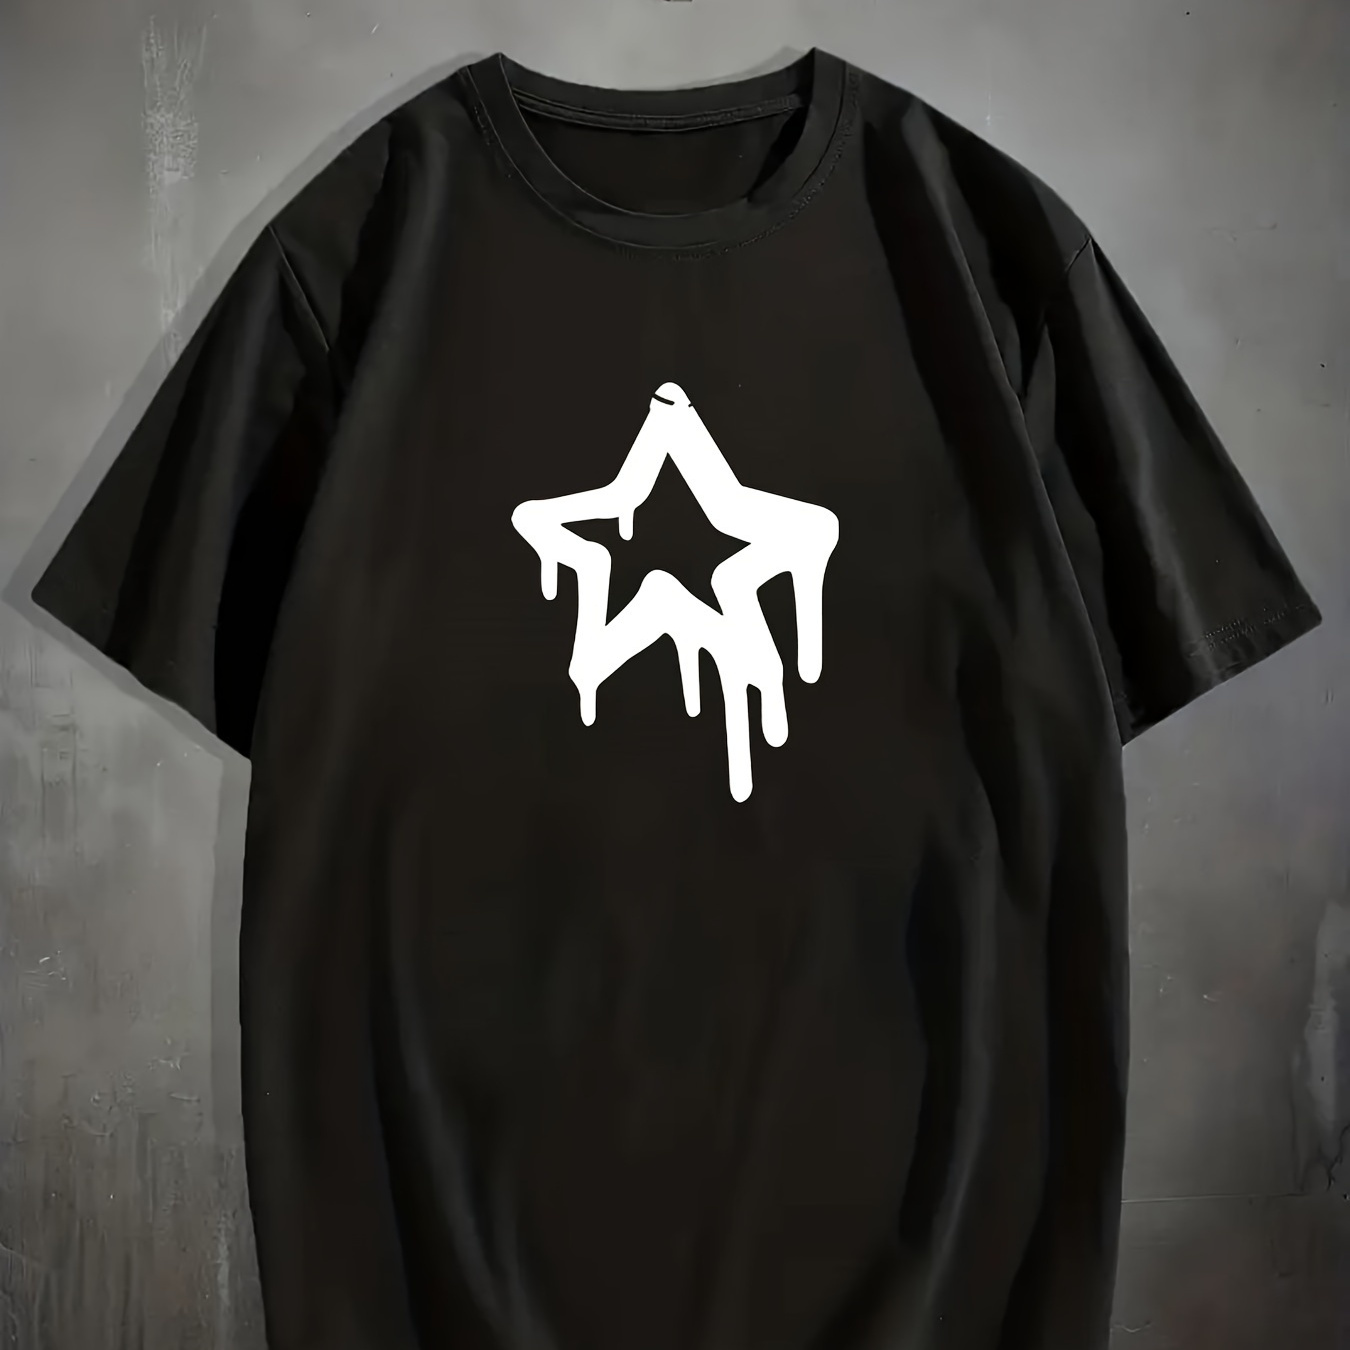 

Dripping Star Print T Shirt, Tees For Men, Casual Short Sleeve T-shirt For Summer